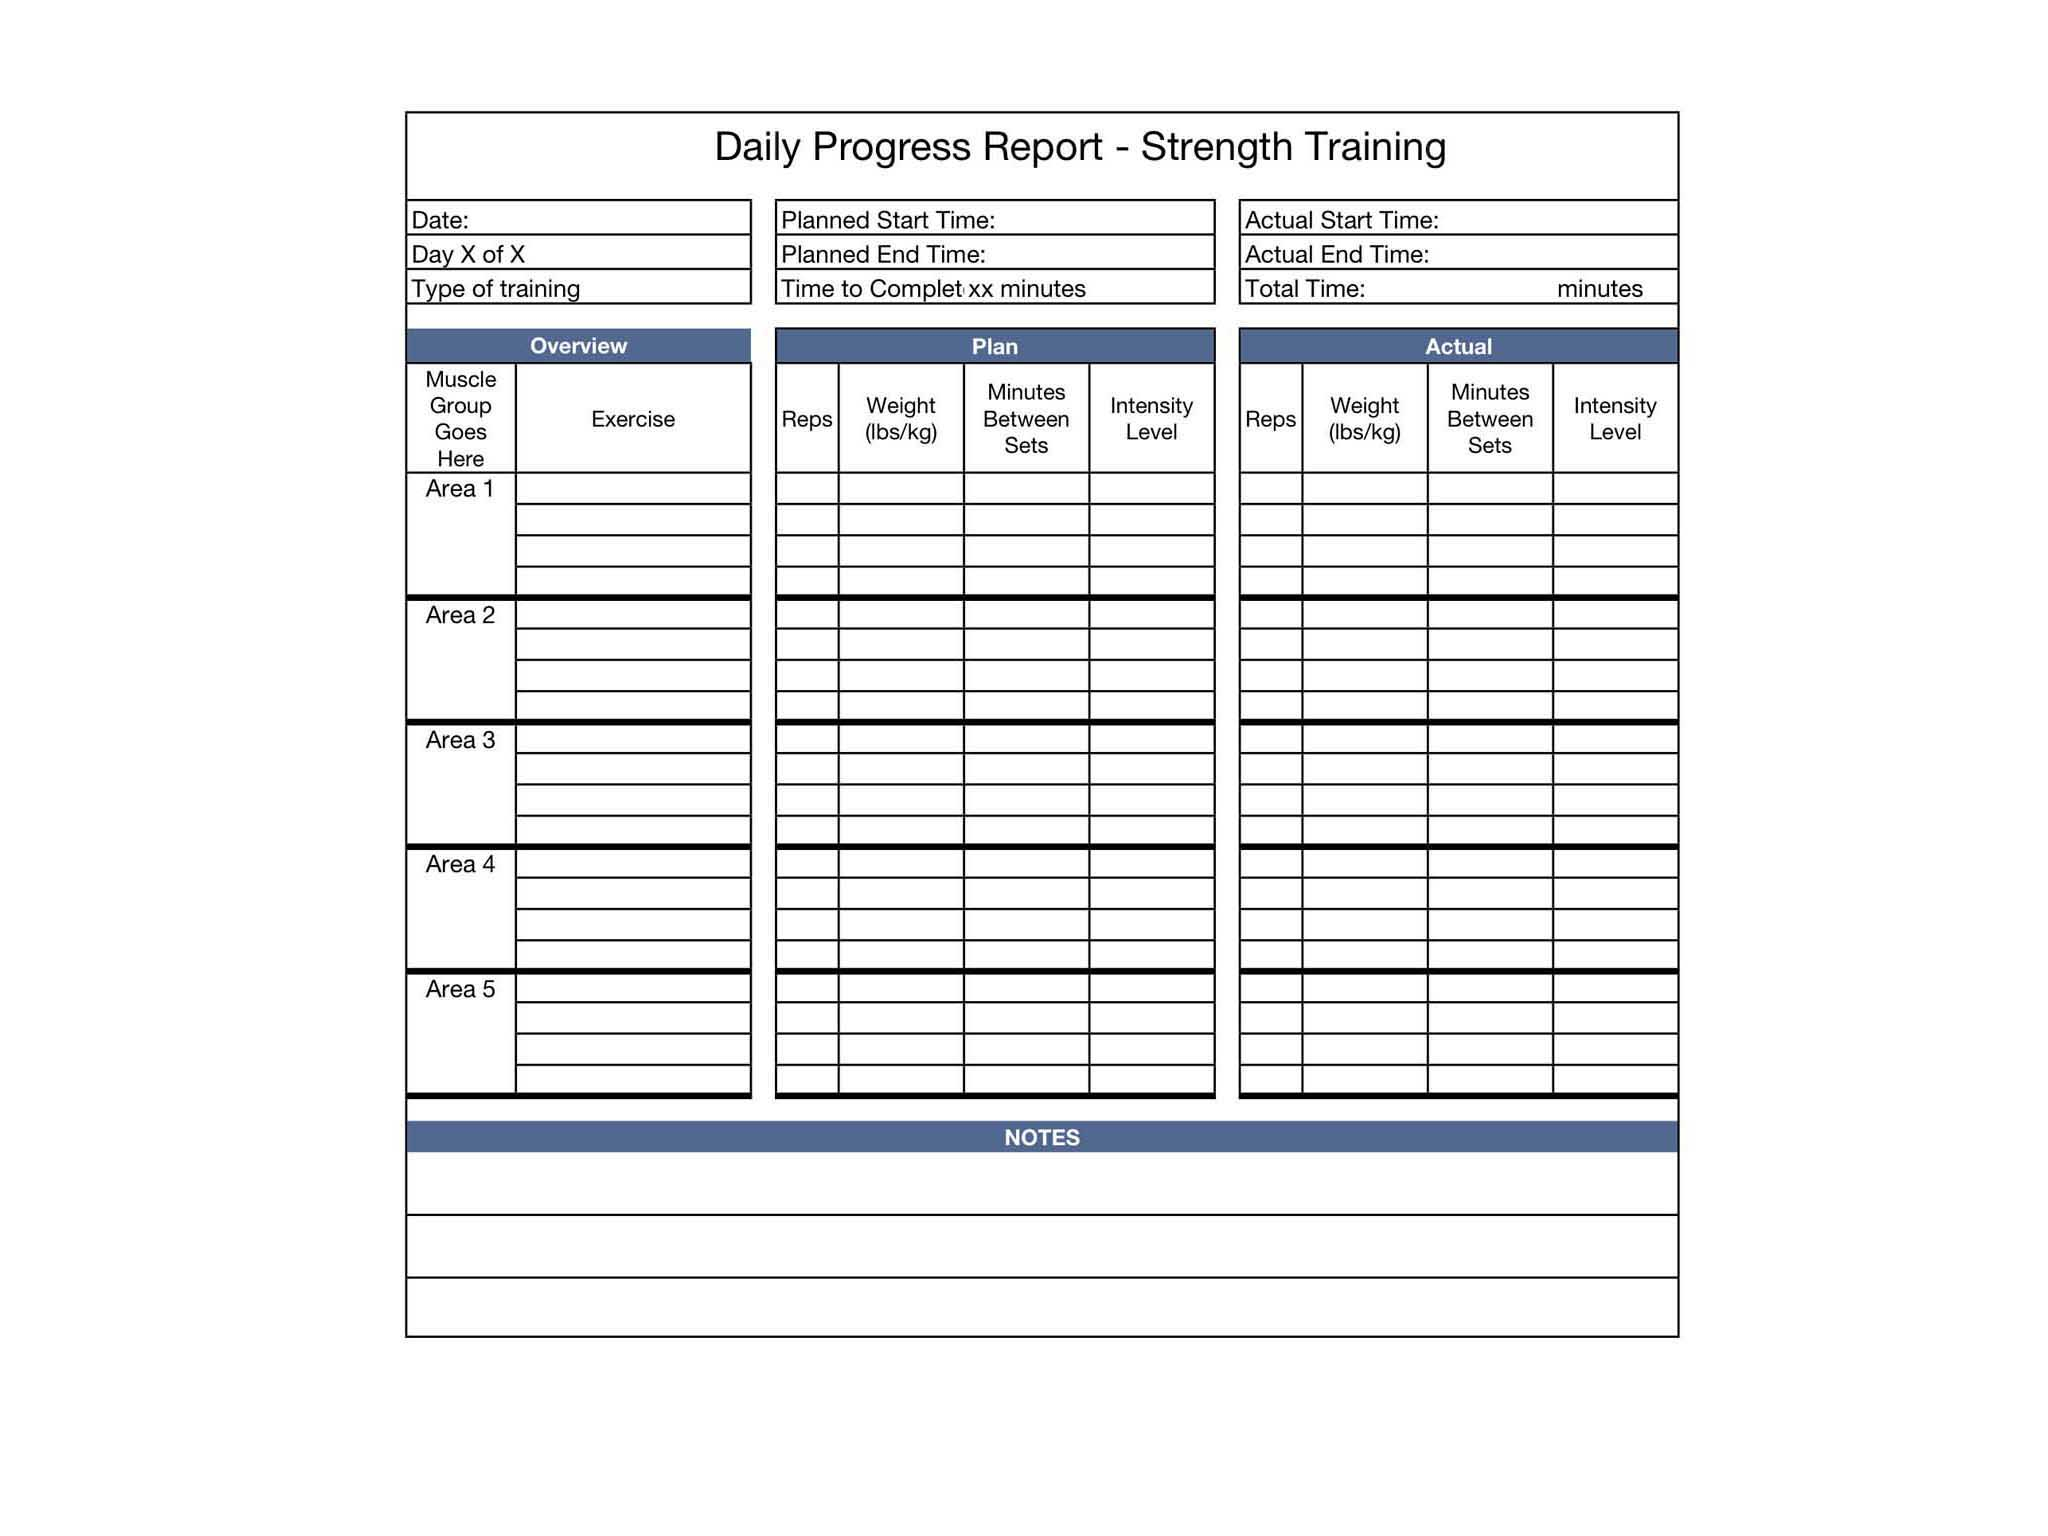 Office Spreadsheet Templates In Templates For Office For Ipad, Iphone, And Ipod Touch  Made For Use